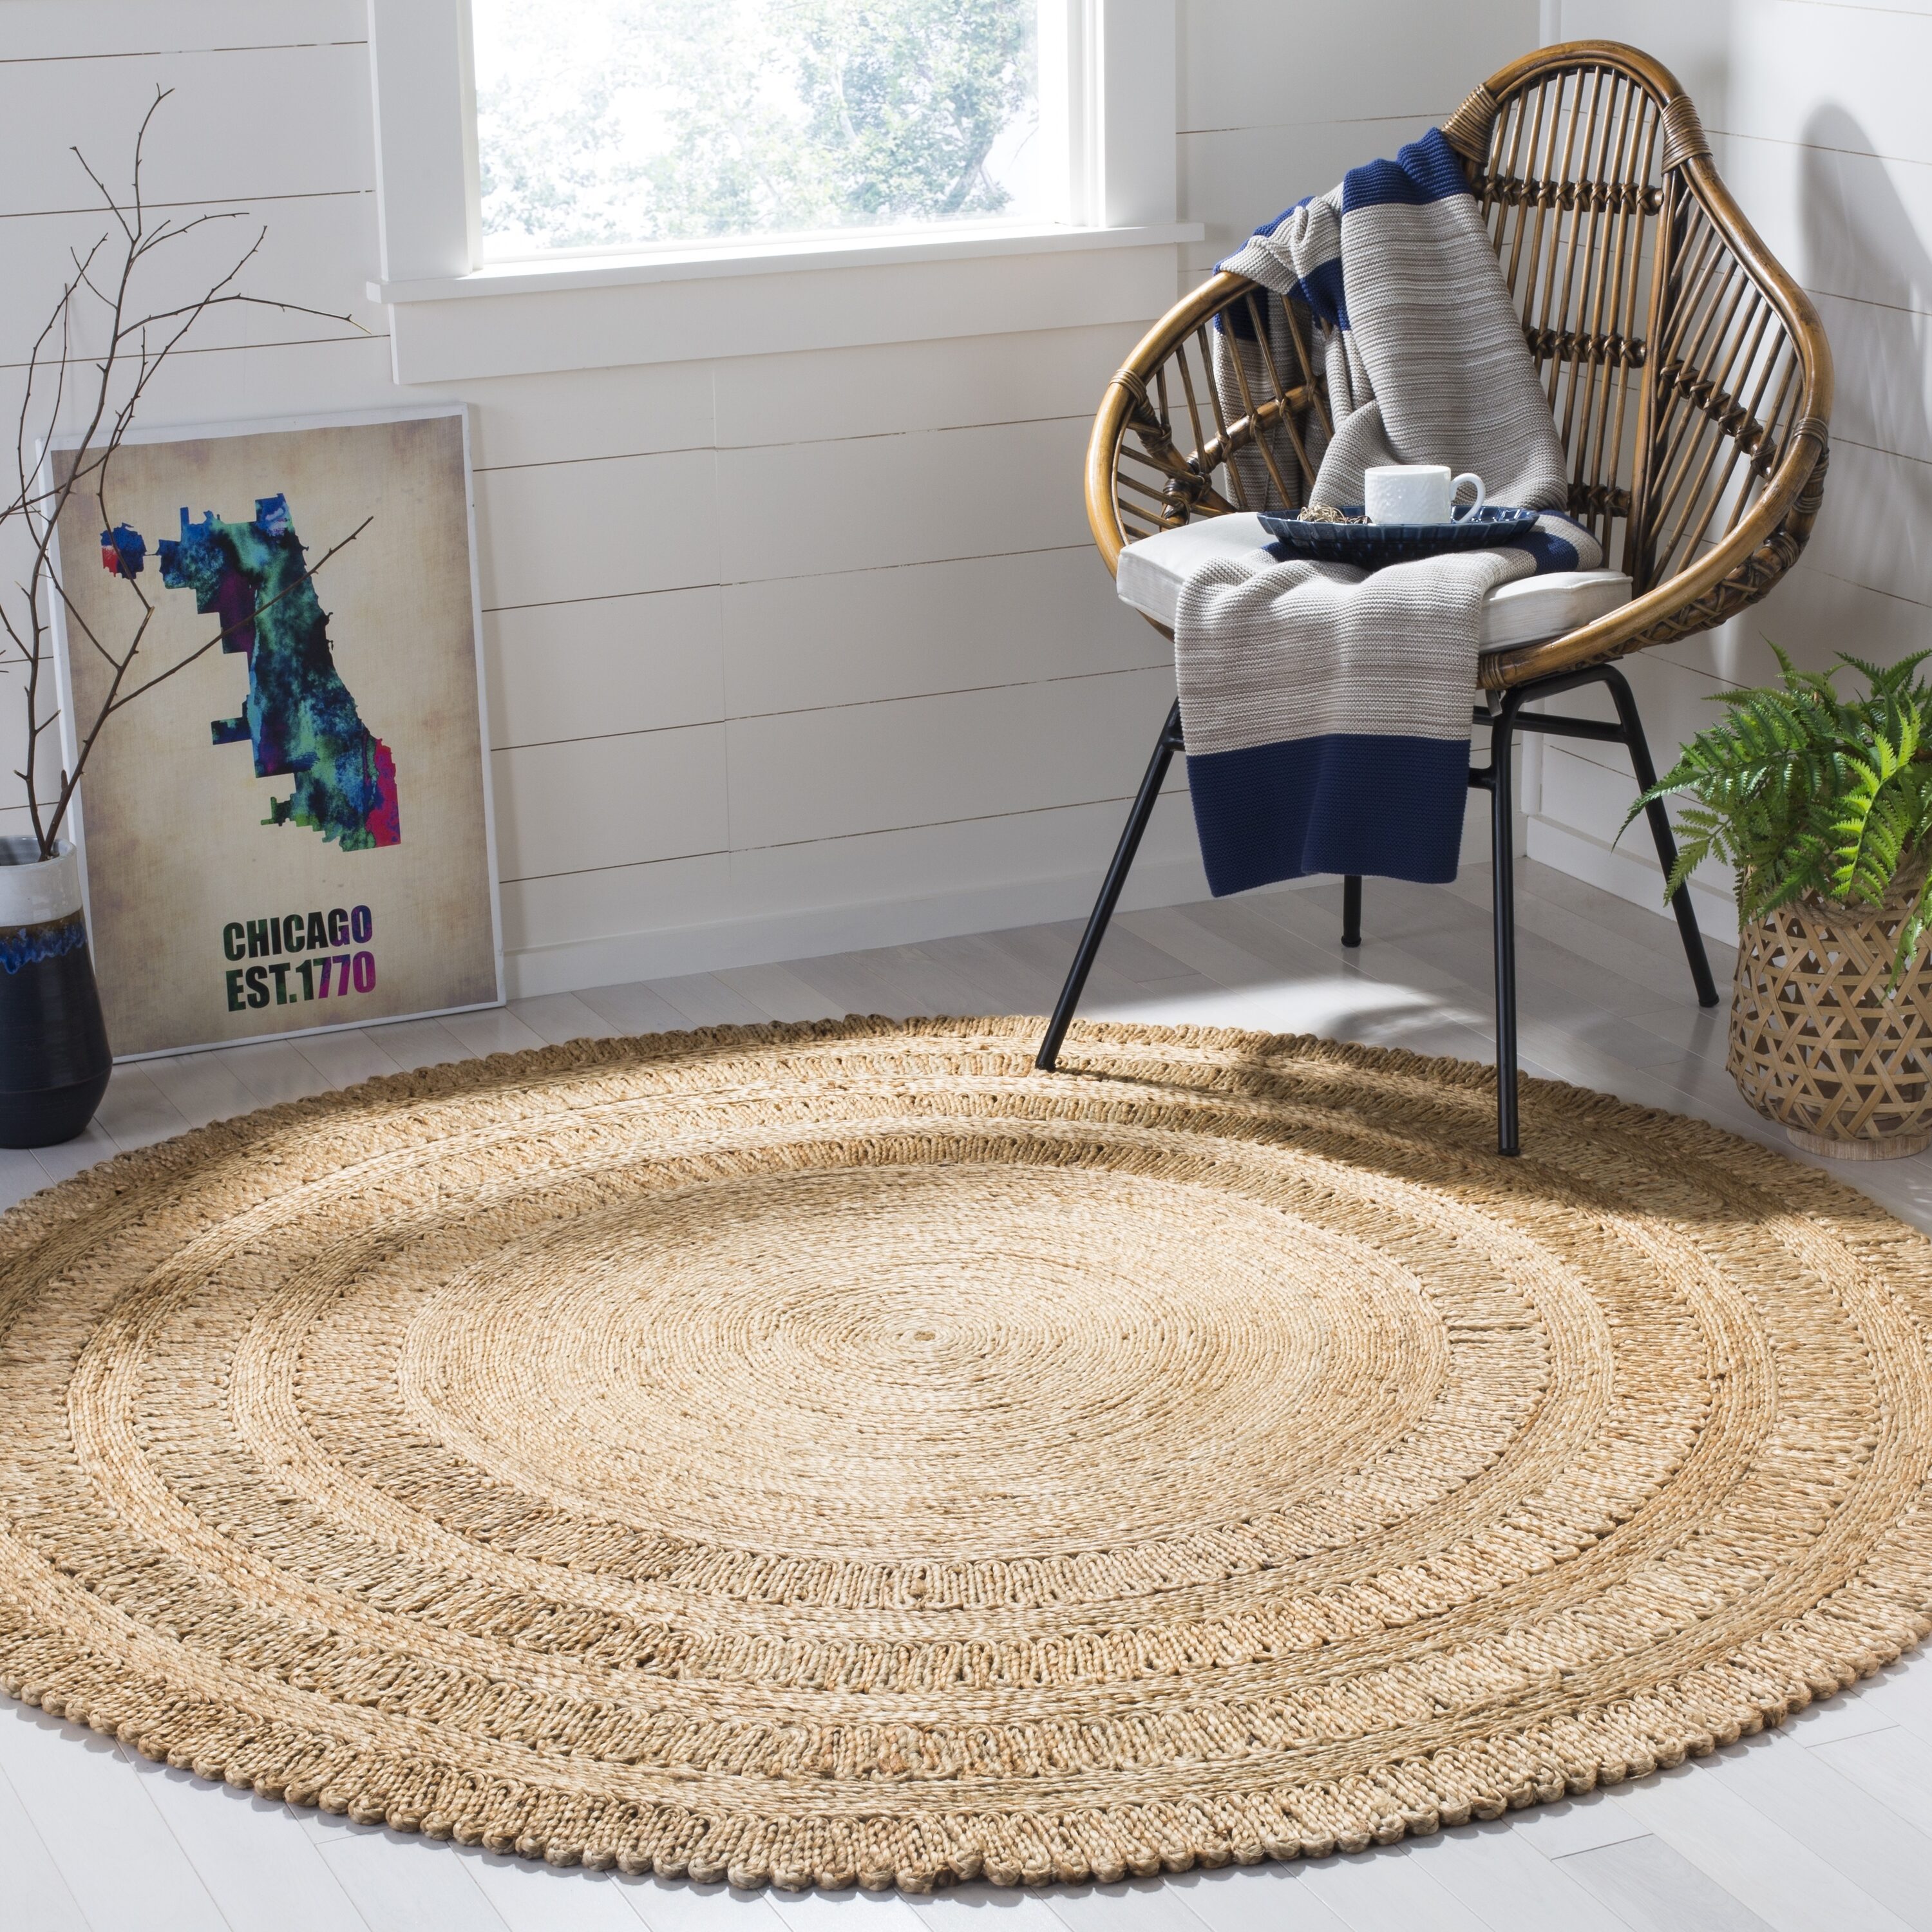 Rugs.com - 4' x 6' Oval Everyday Performance Rug Pad 1/4 Thick Felt & Non-Slip Backing Perfect for Any Flooring Surface